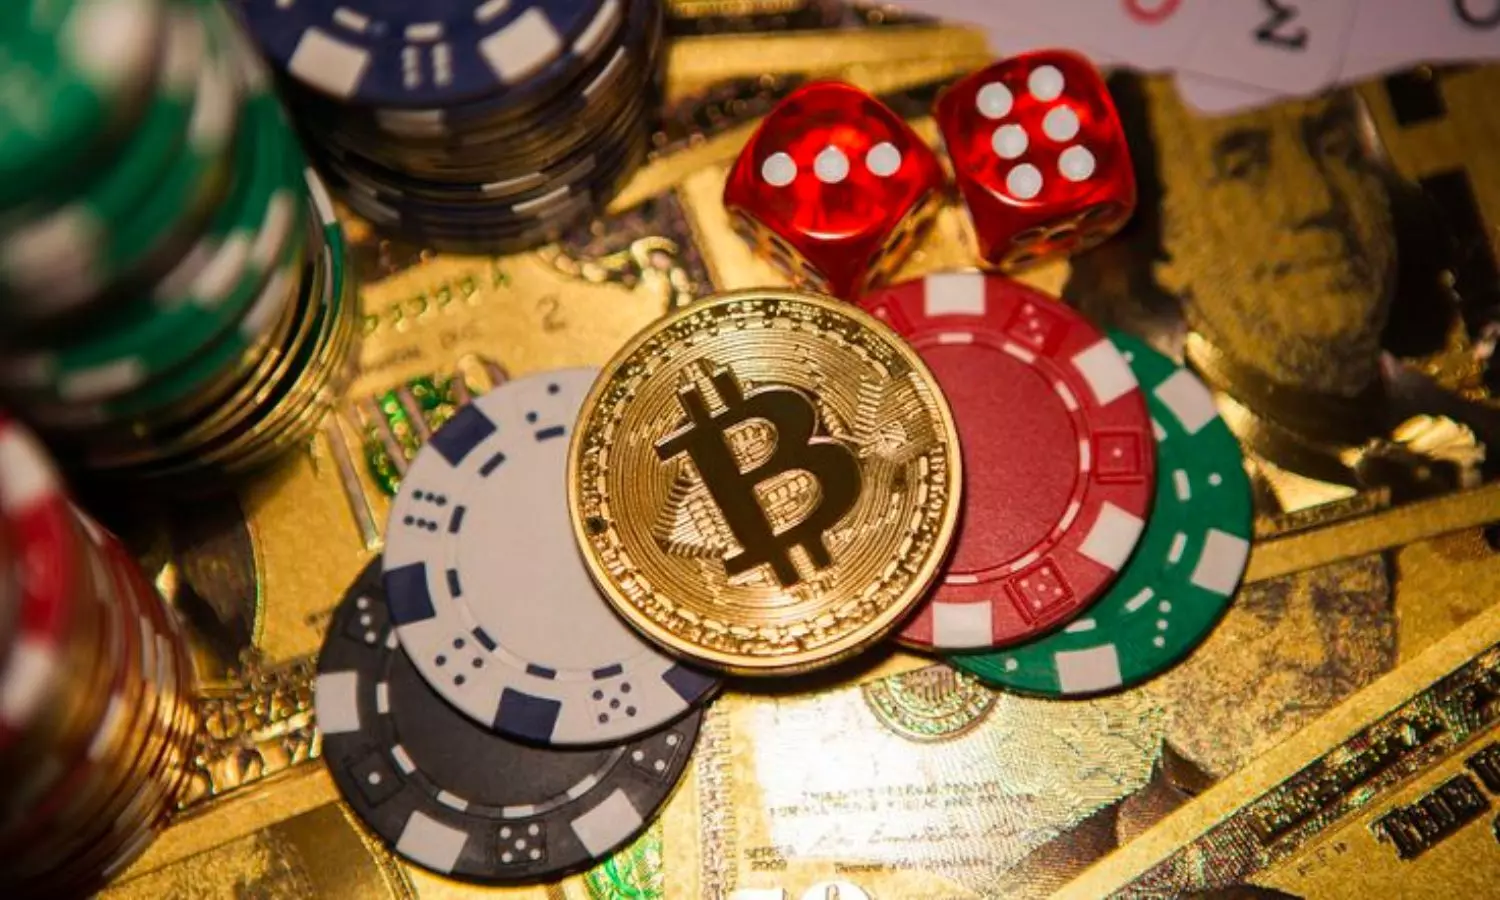 bitcoin casino sites - What Can Your Learn From Your Critics